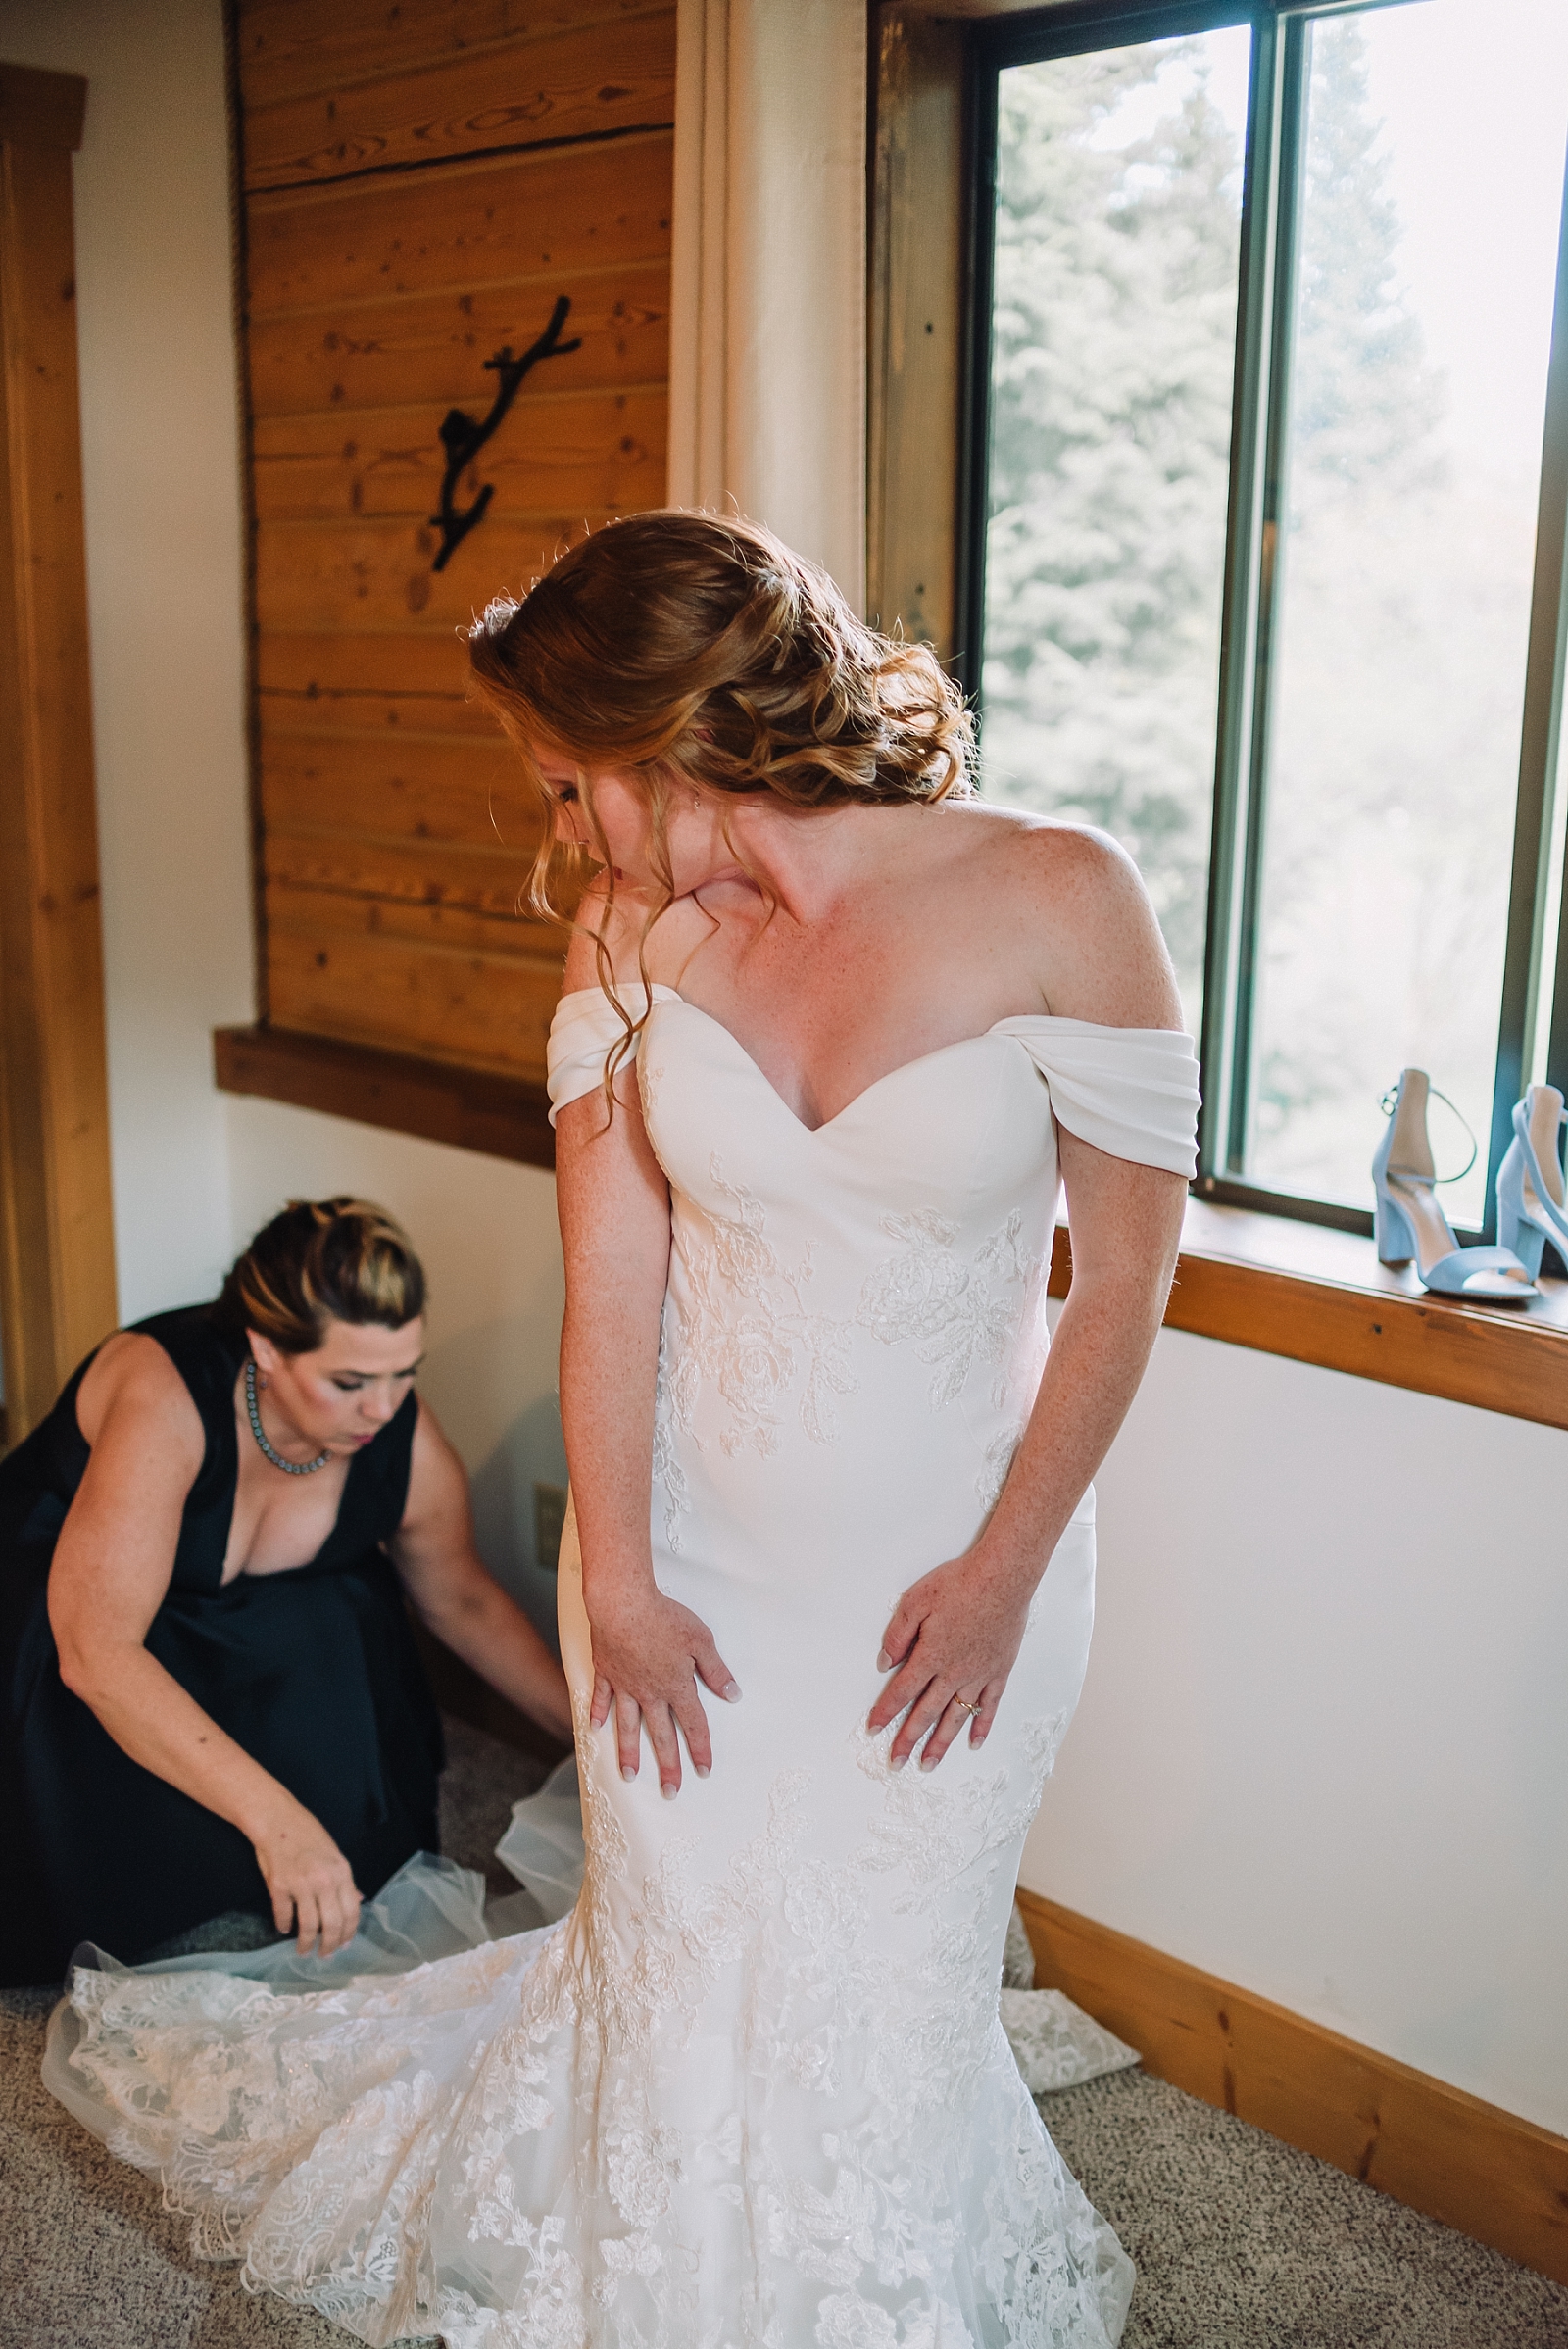 mother helping bride get ready for wedding